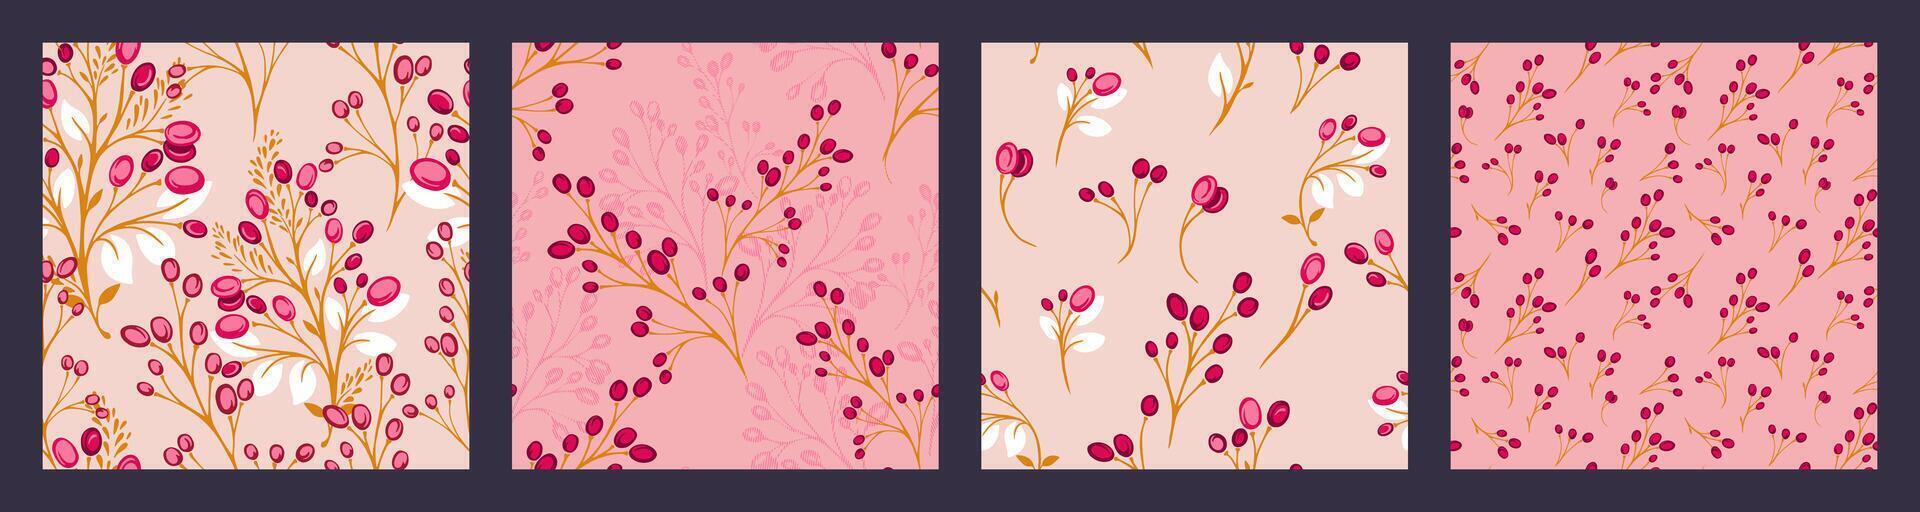 Peach collage of set seamless patterns print with creative, abstract chic branches tiny leaves and abstract shapes berries, drops, spots. Vector hand drawn. Templates for design, printing, patterned